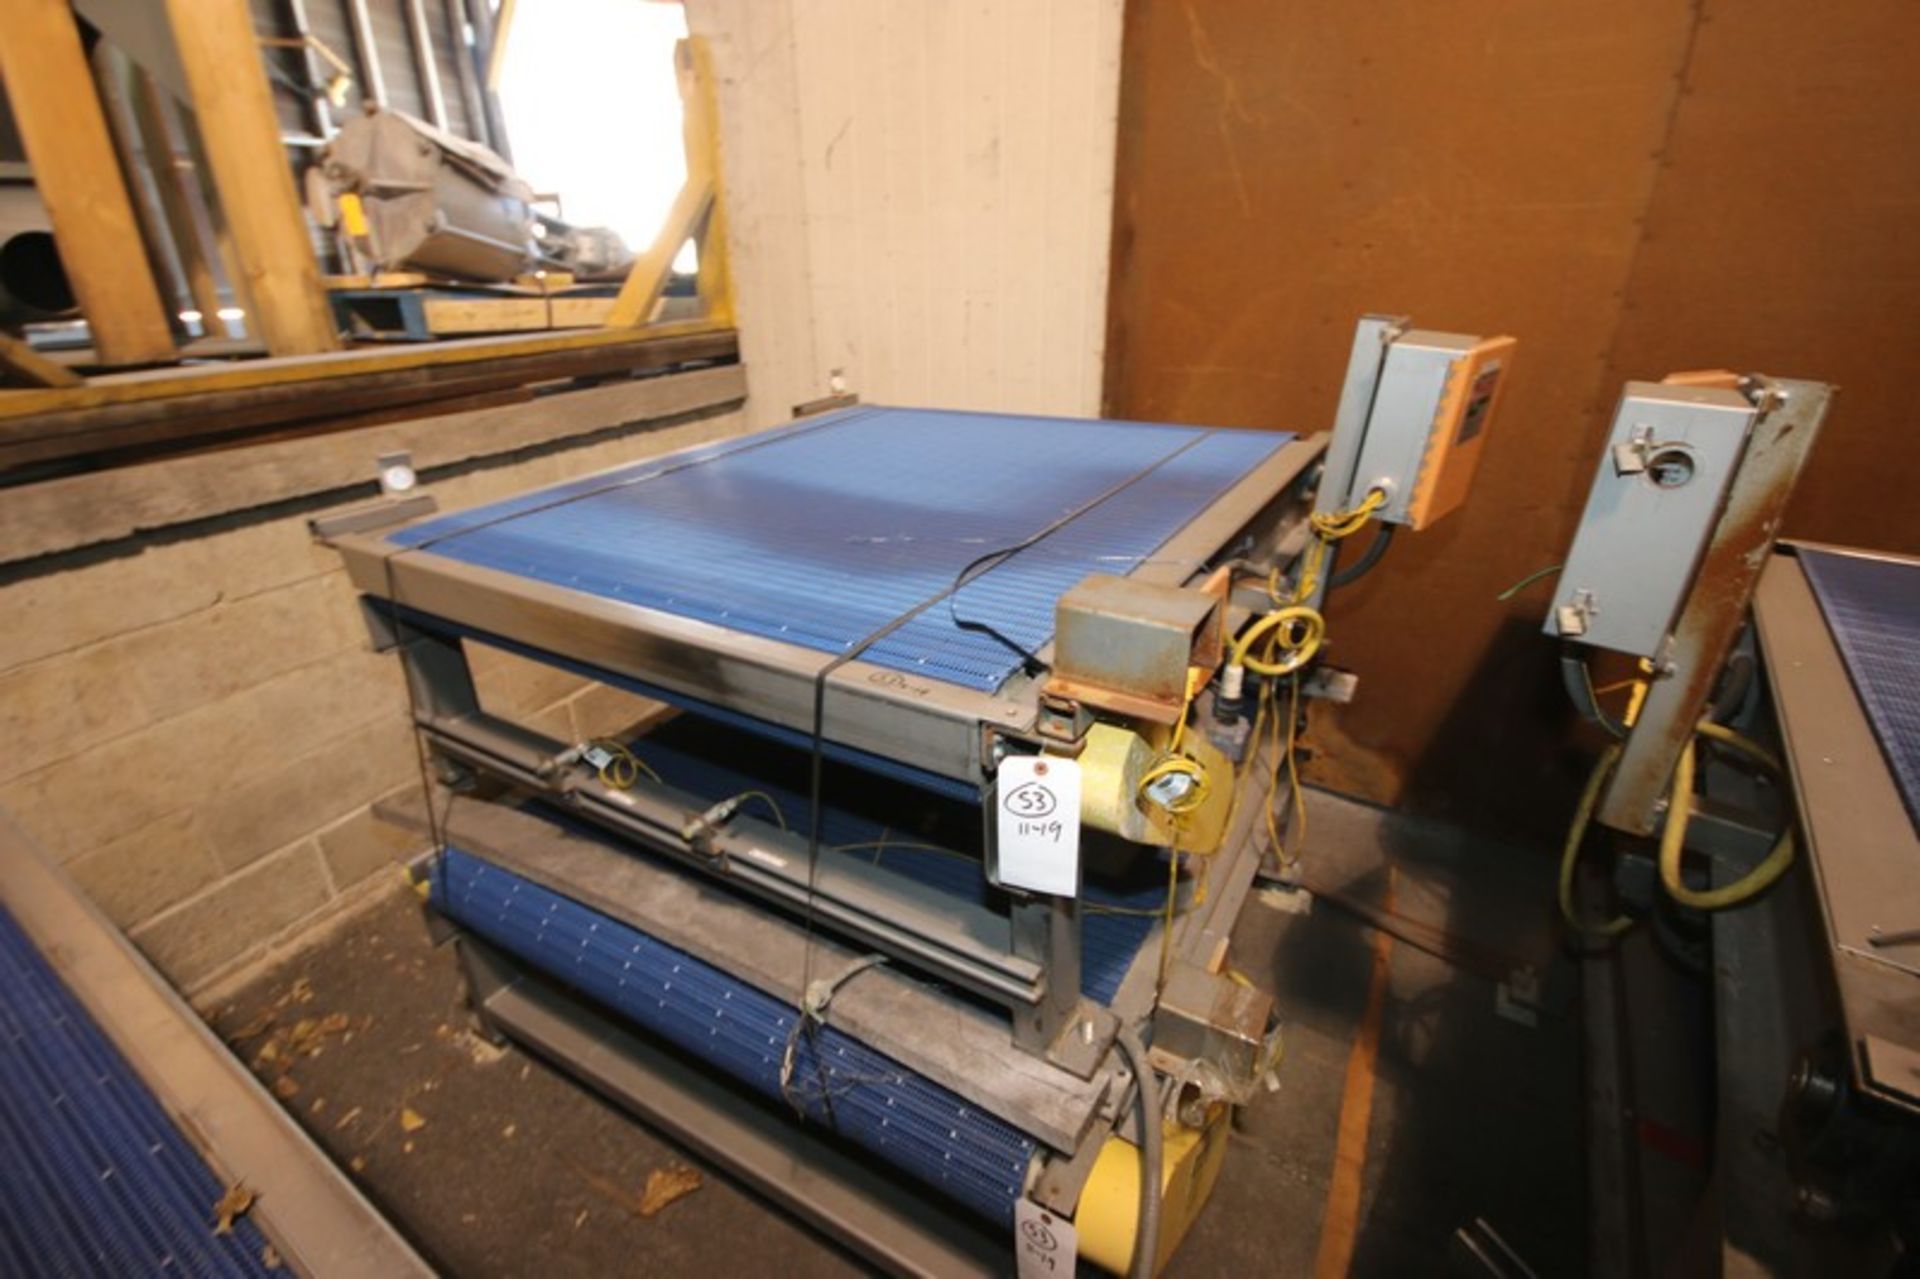 6-Sections of H&CS Conveyors, Overall Dims.:Aprox. 60" L x 64" W x 36" H, with Plastic Blue Belt, - Image 2 of 7